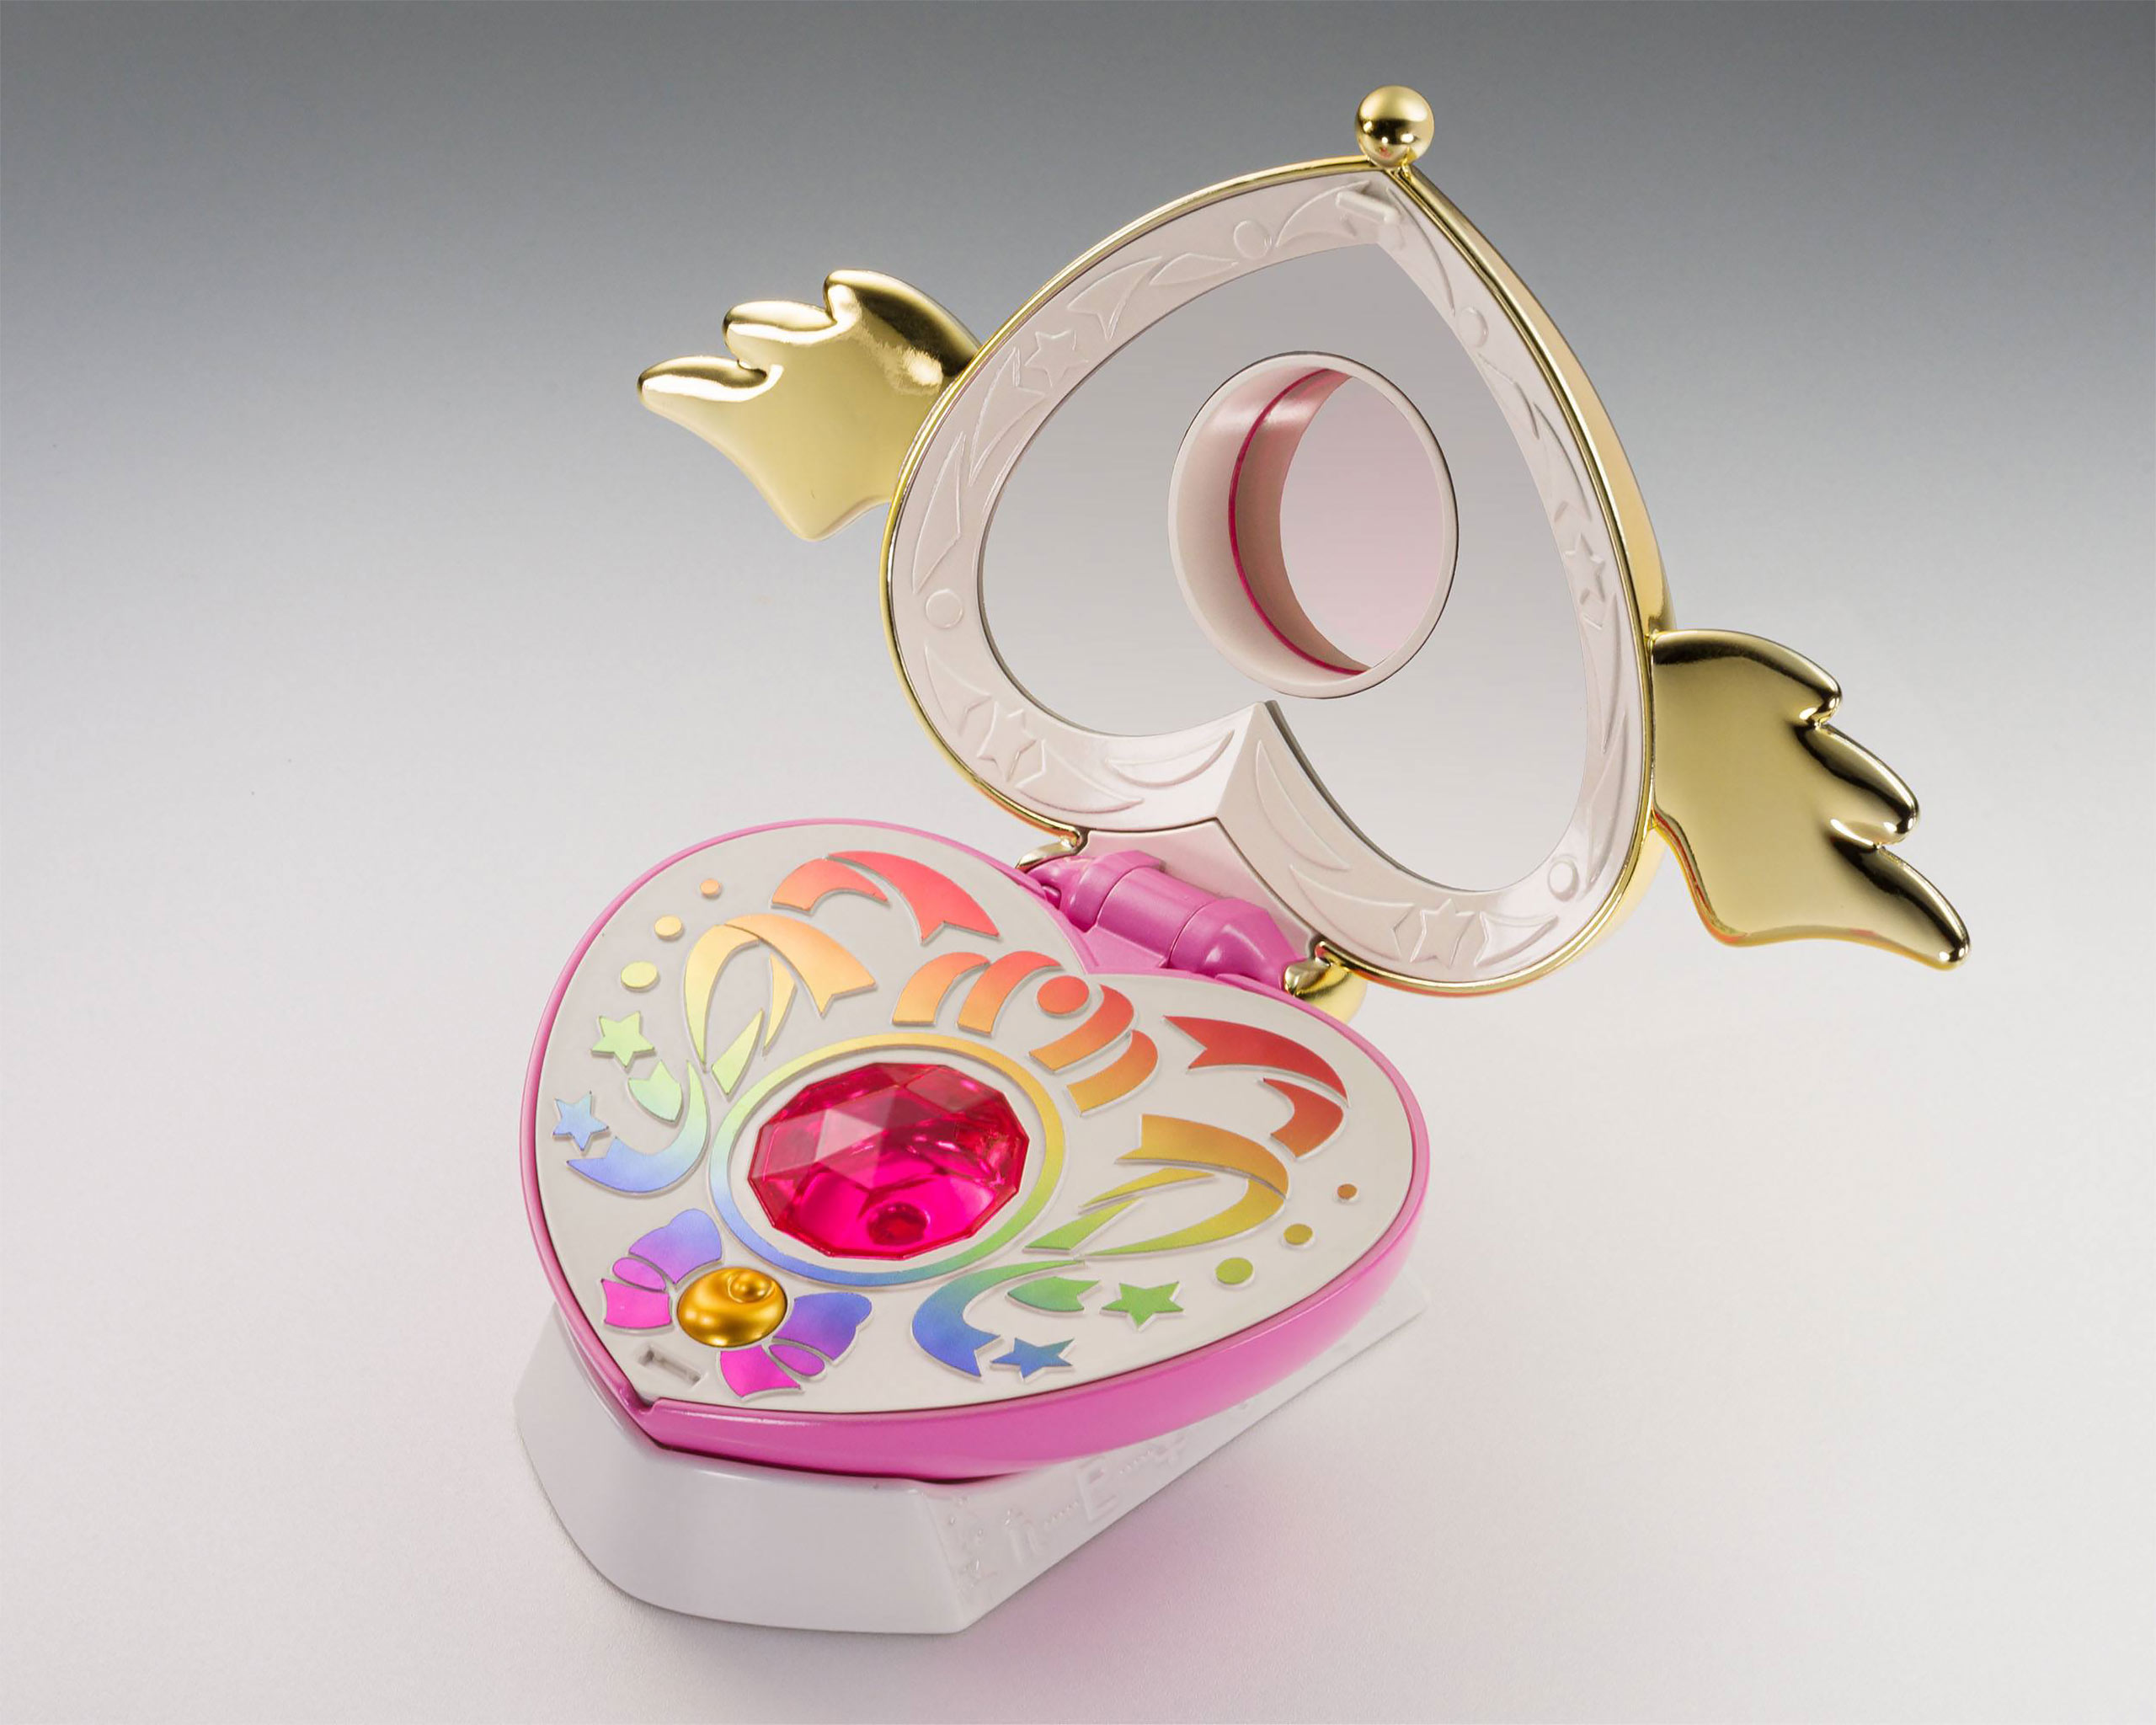 Sailor Moon - Crisis Moon Compact Transformation Brooch with Light and Sound Effects